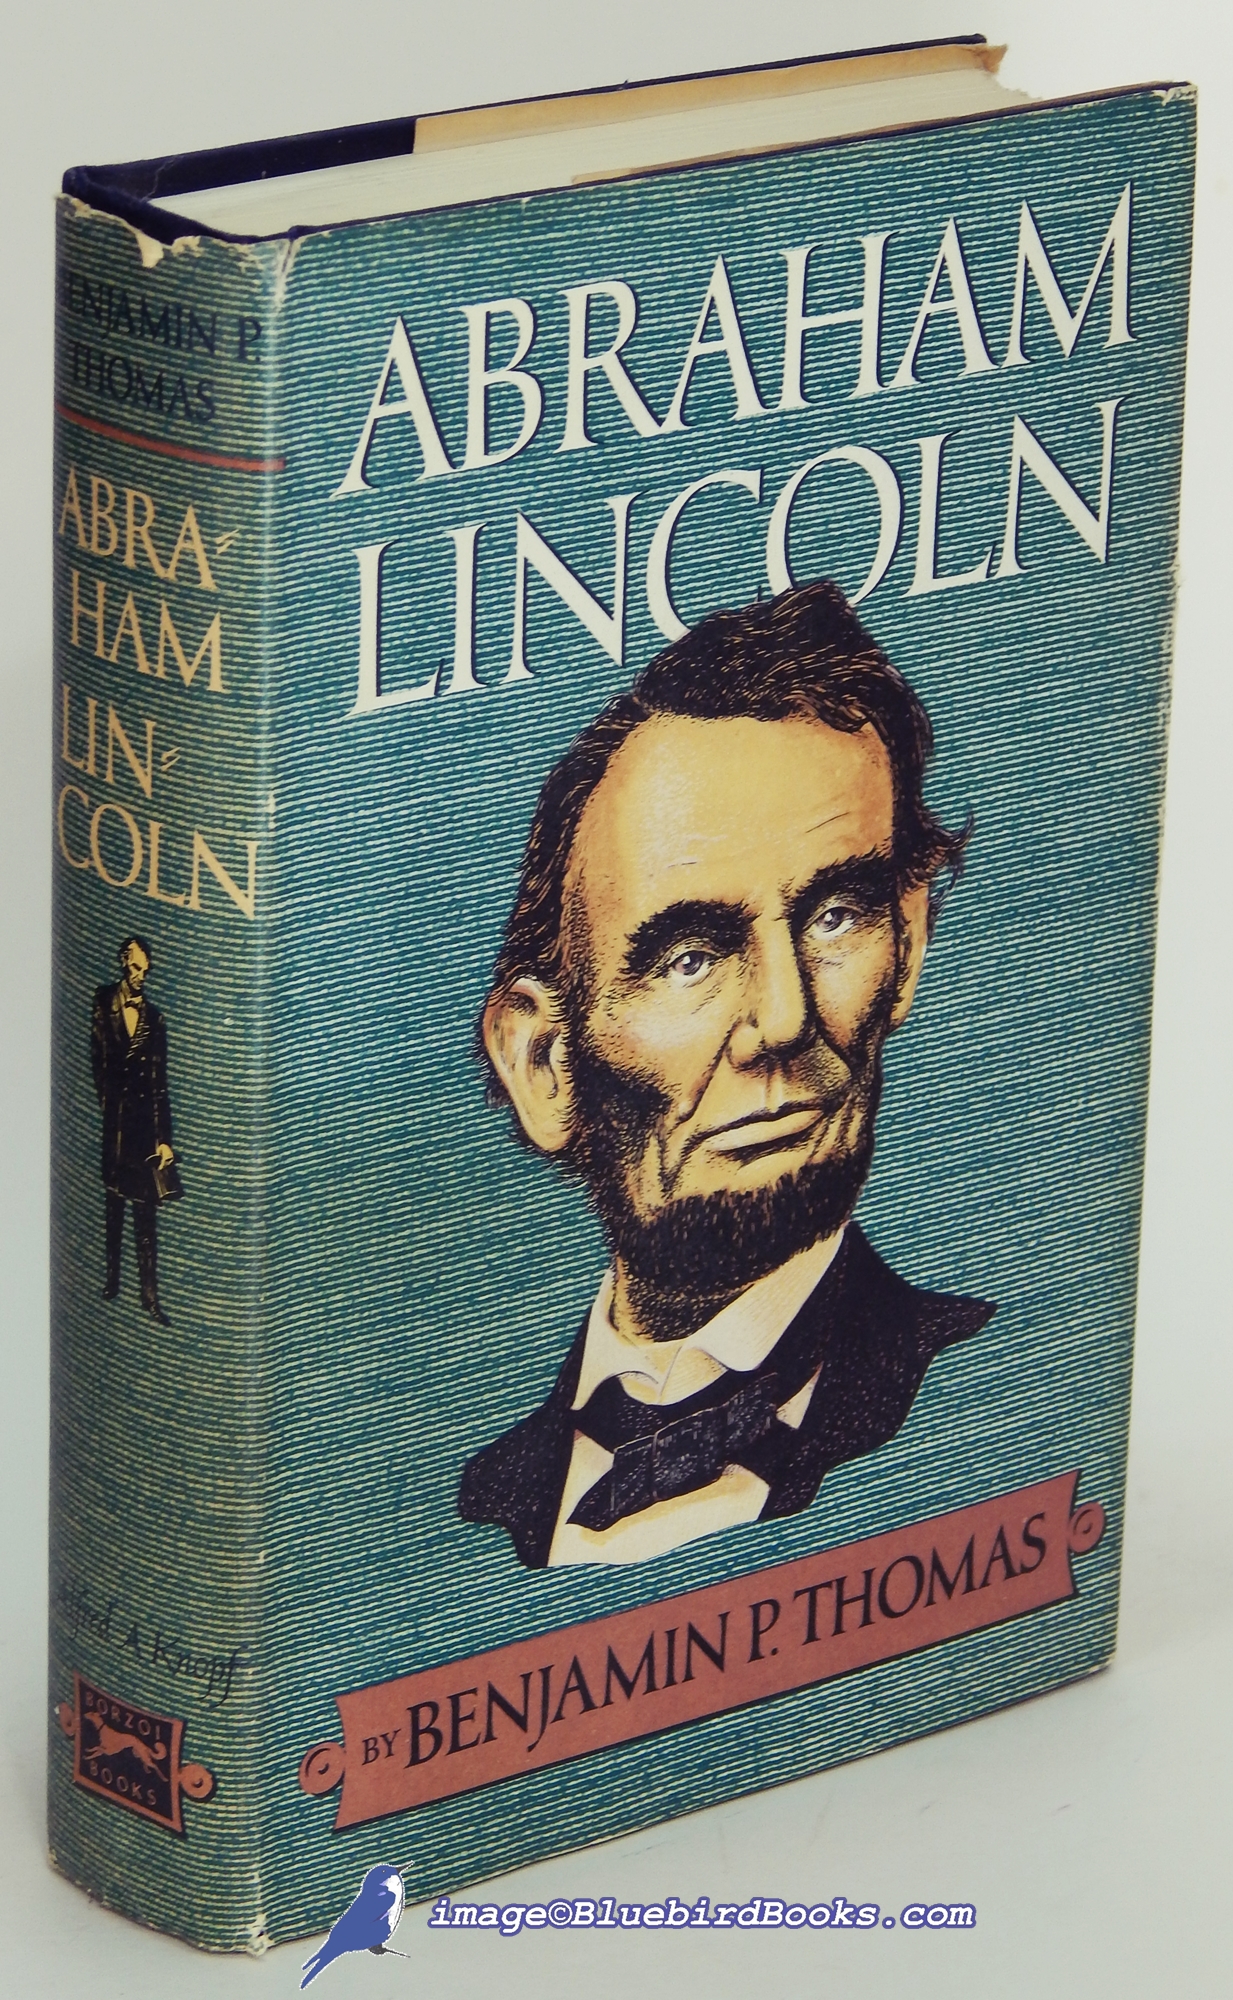 a biography about abraham lincoln